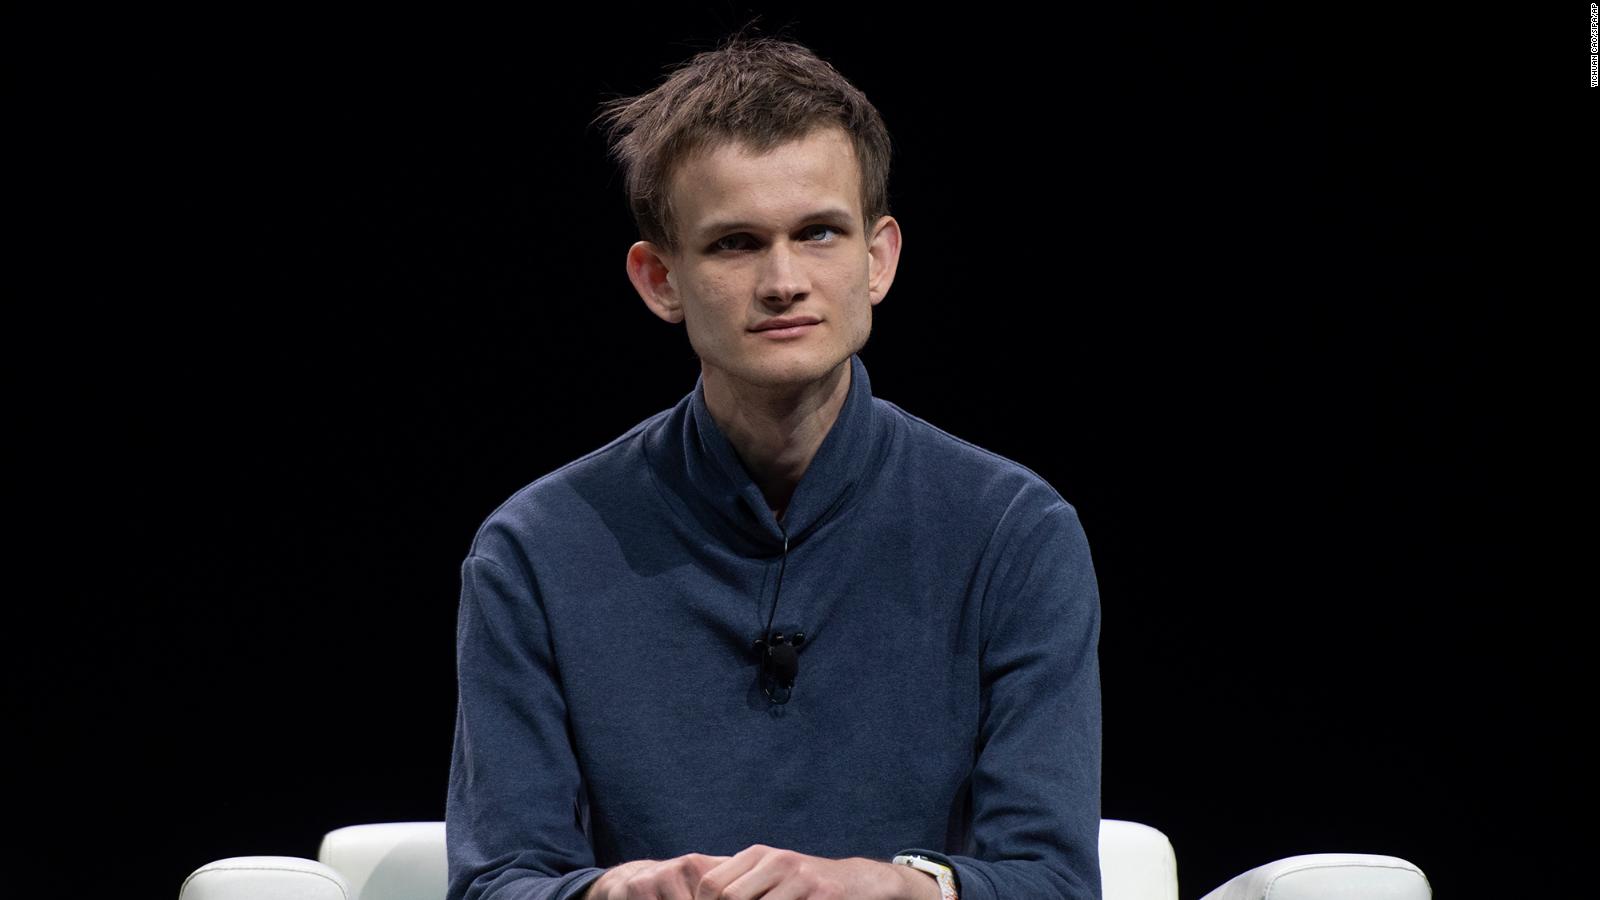 Vitalik Buterin: The 27-year-old behind ethereum isn't surprised by the crypto crash - CNN